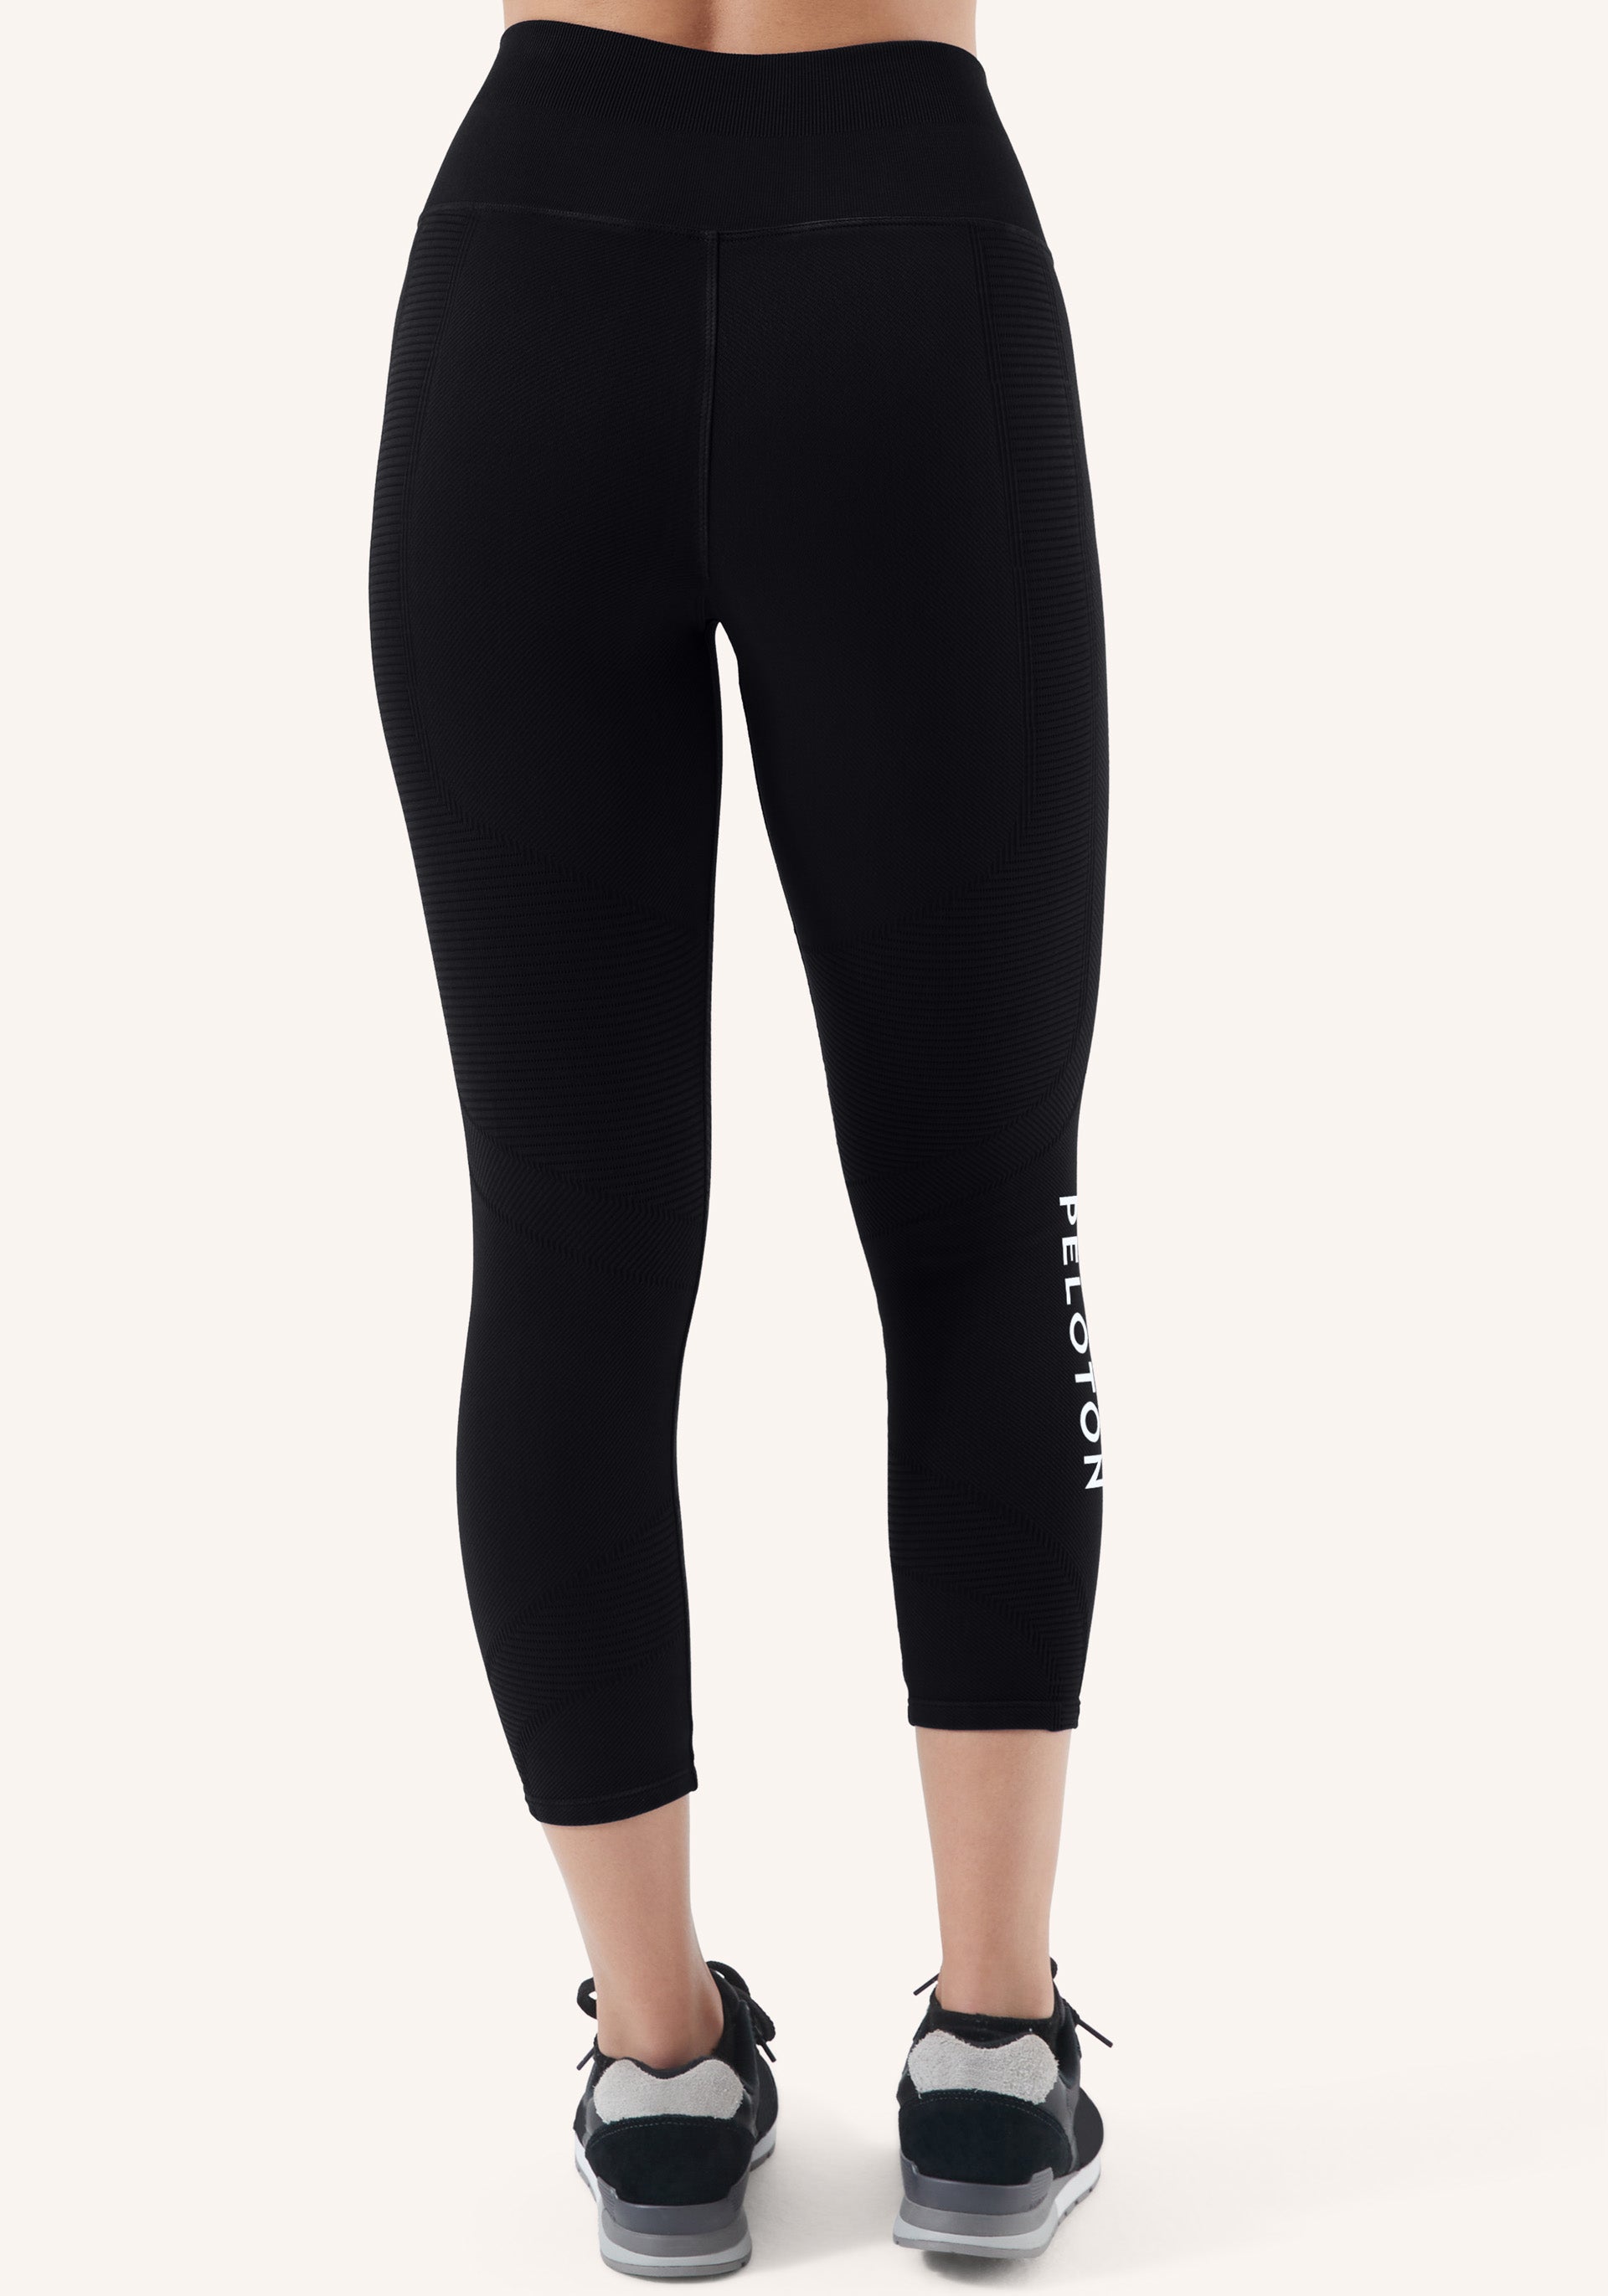 Nux One By One 7/8 Legging